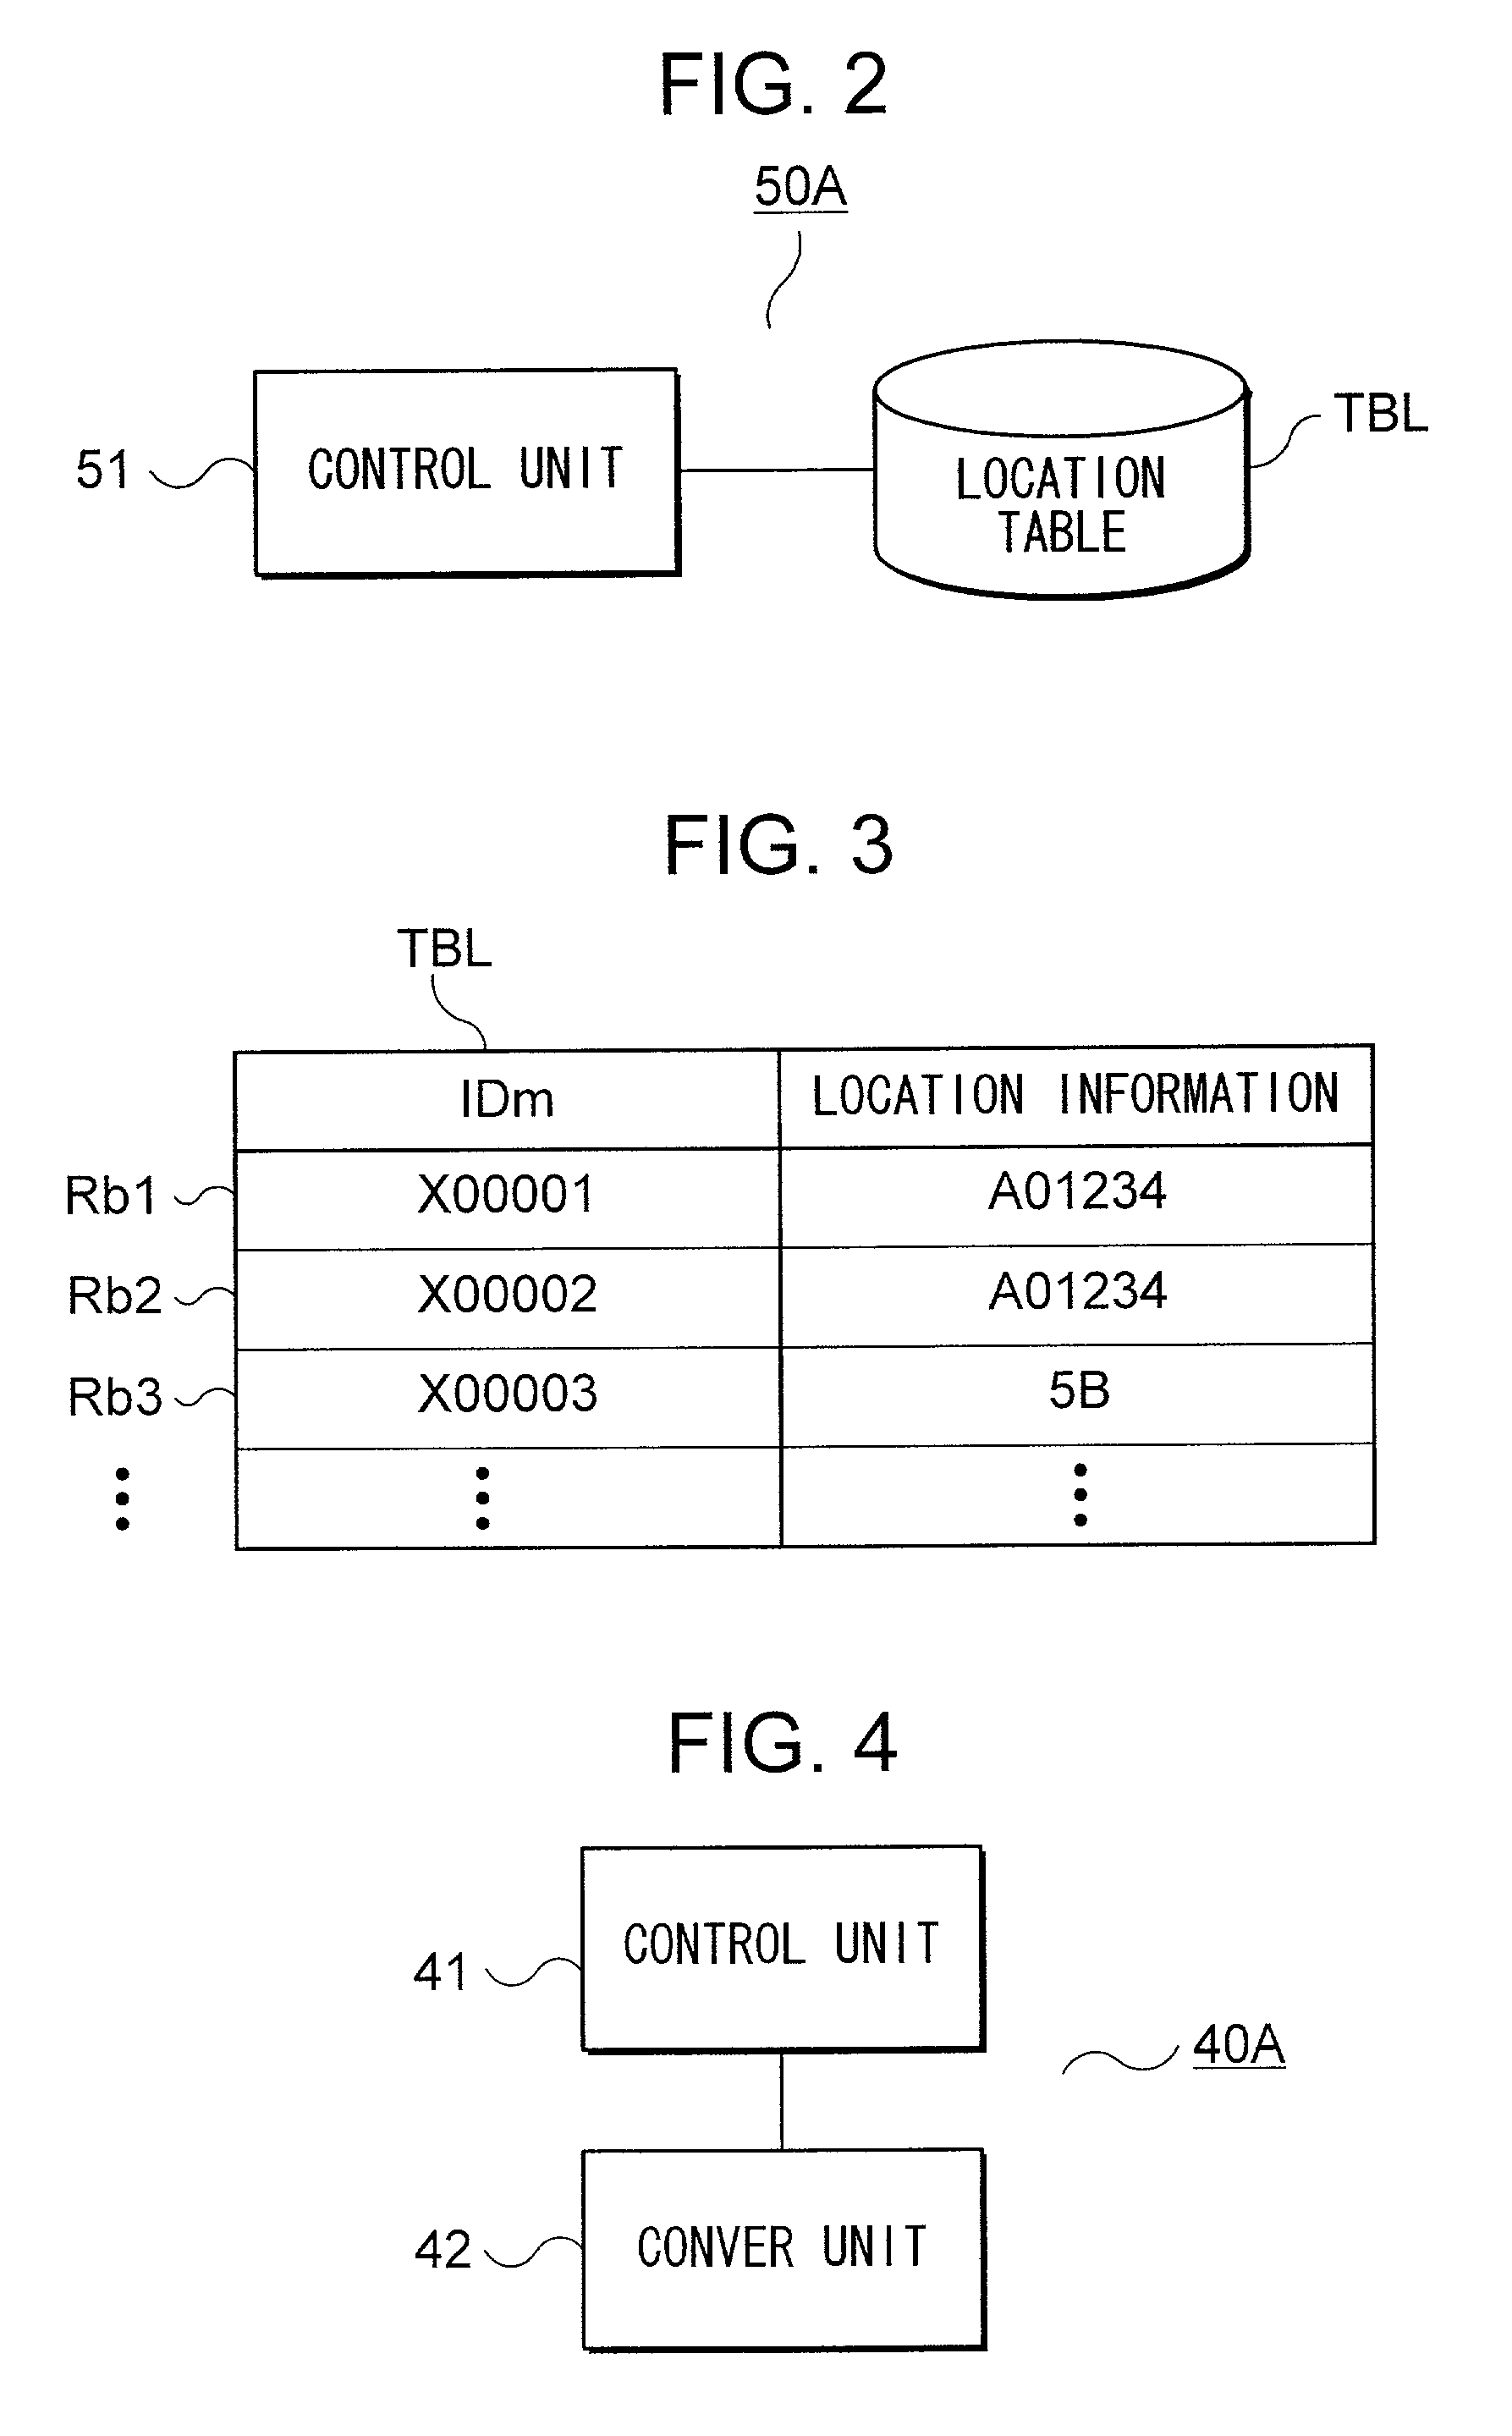 Method and system for location management and location information providing system